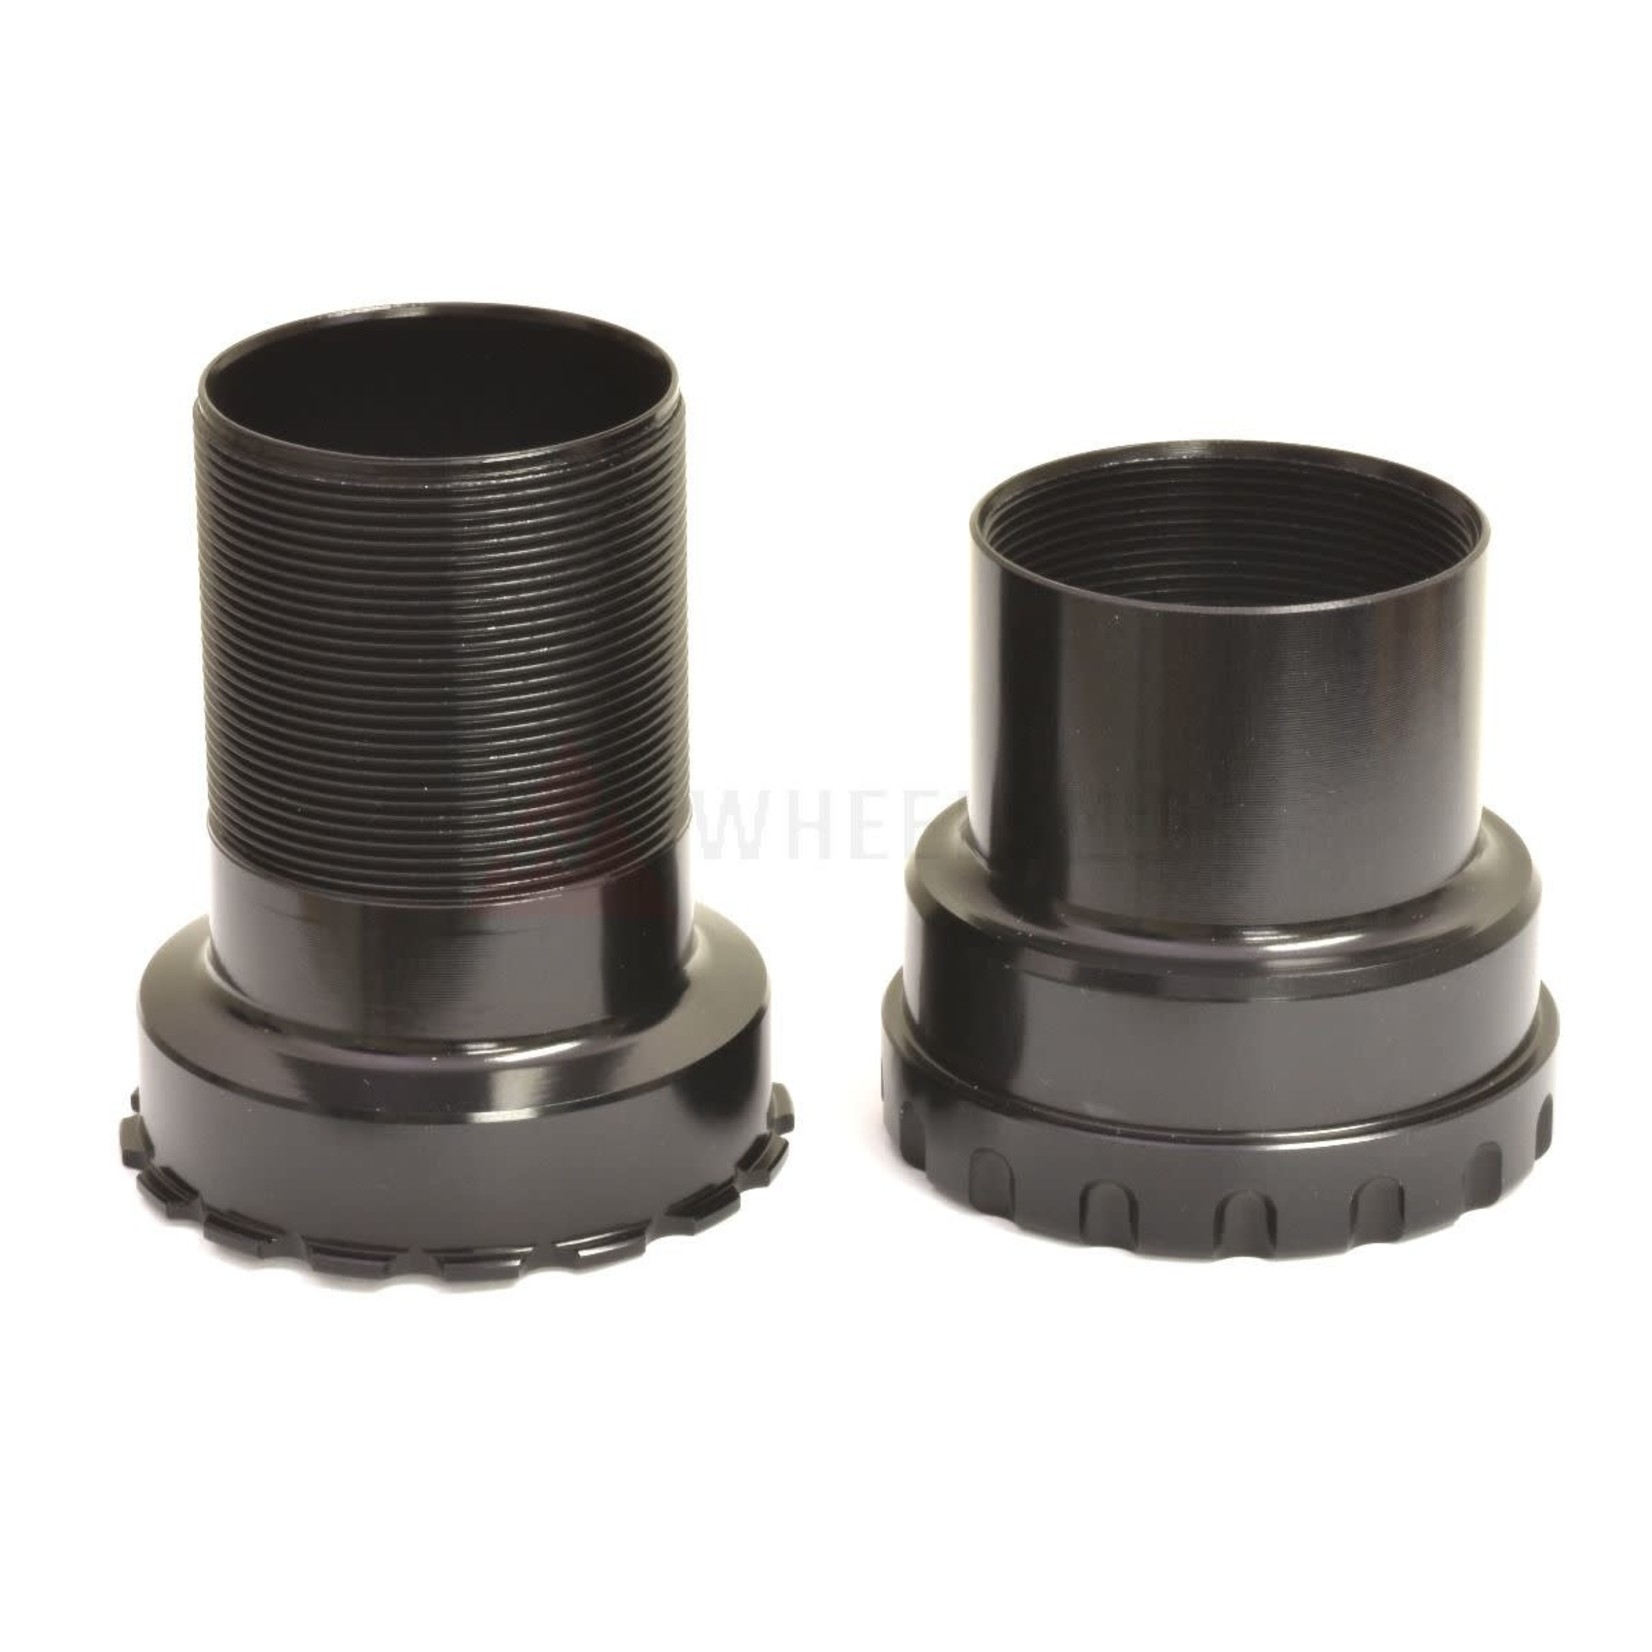 Wheels Manufacturing Wheels Mfg Bottom Bracket - BBRight Outboard Angular Contact BB for 24mm (Shimano) Cranks